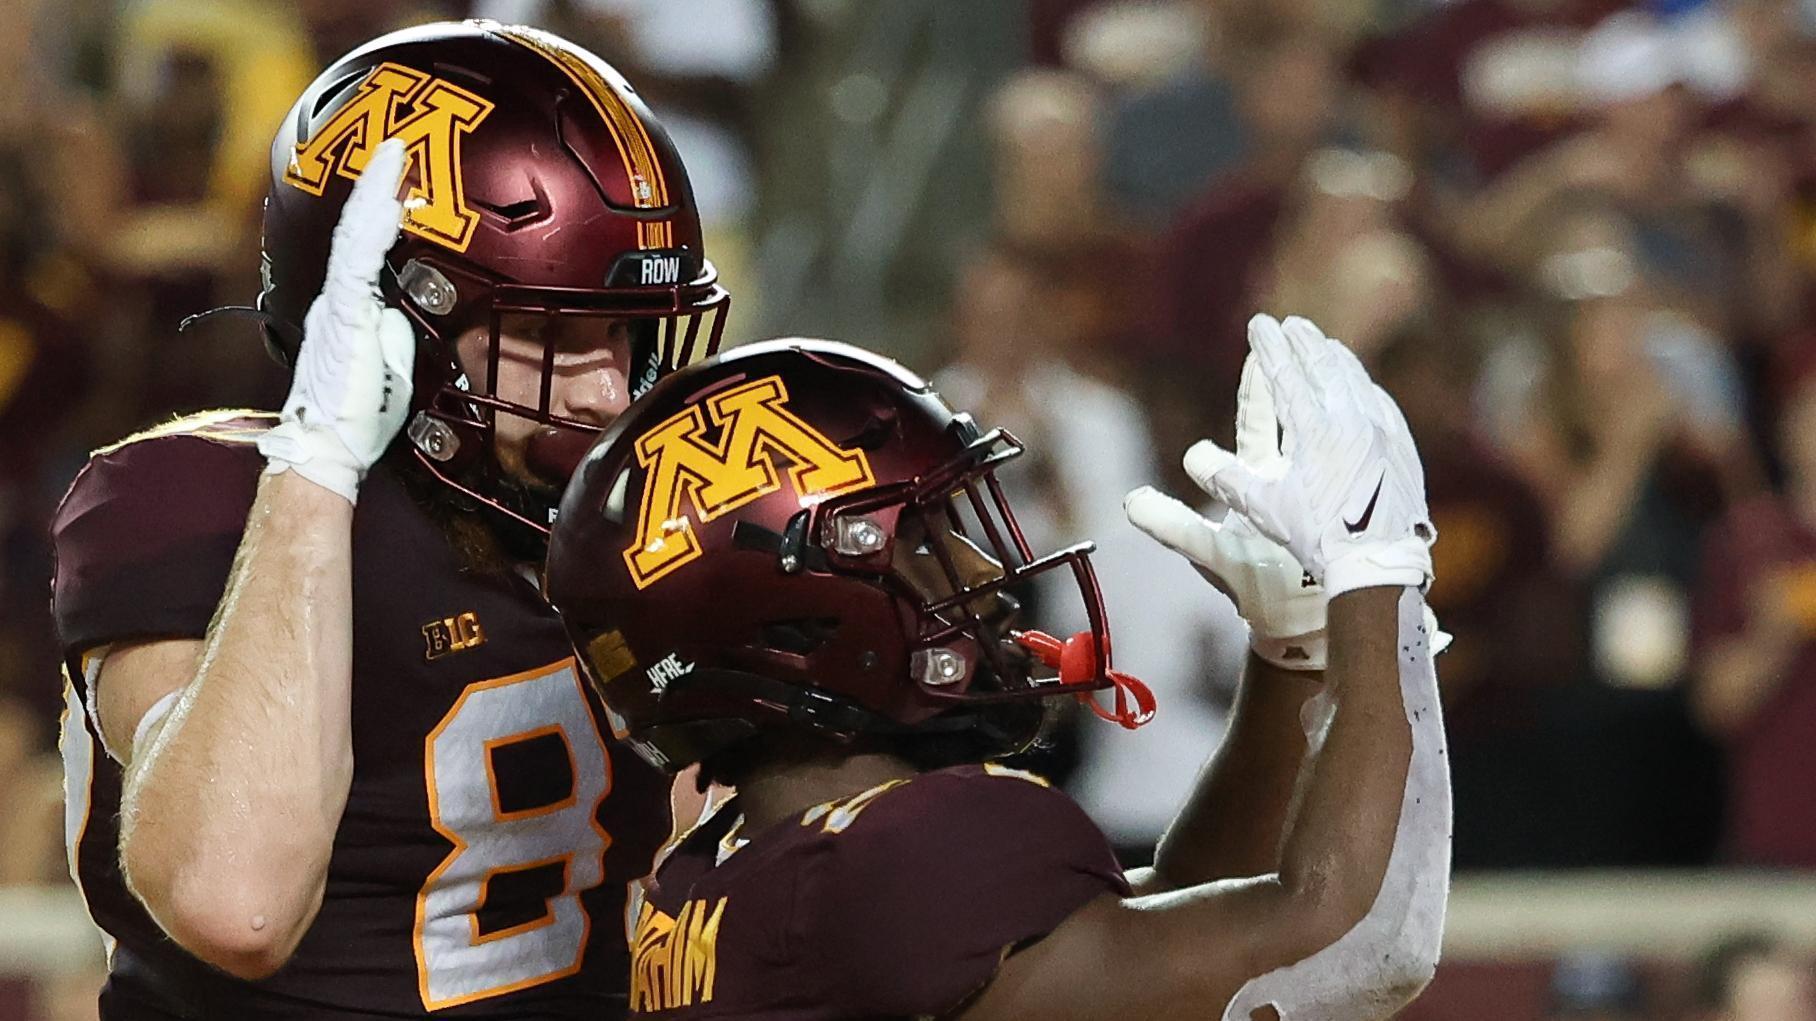 Trey Potts of the Minnesota Golden Gophers runs up the field in the